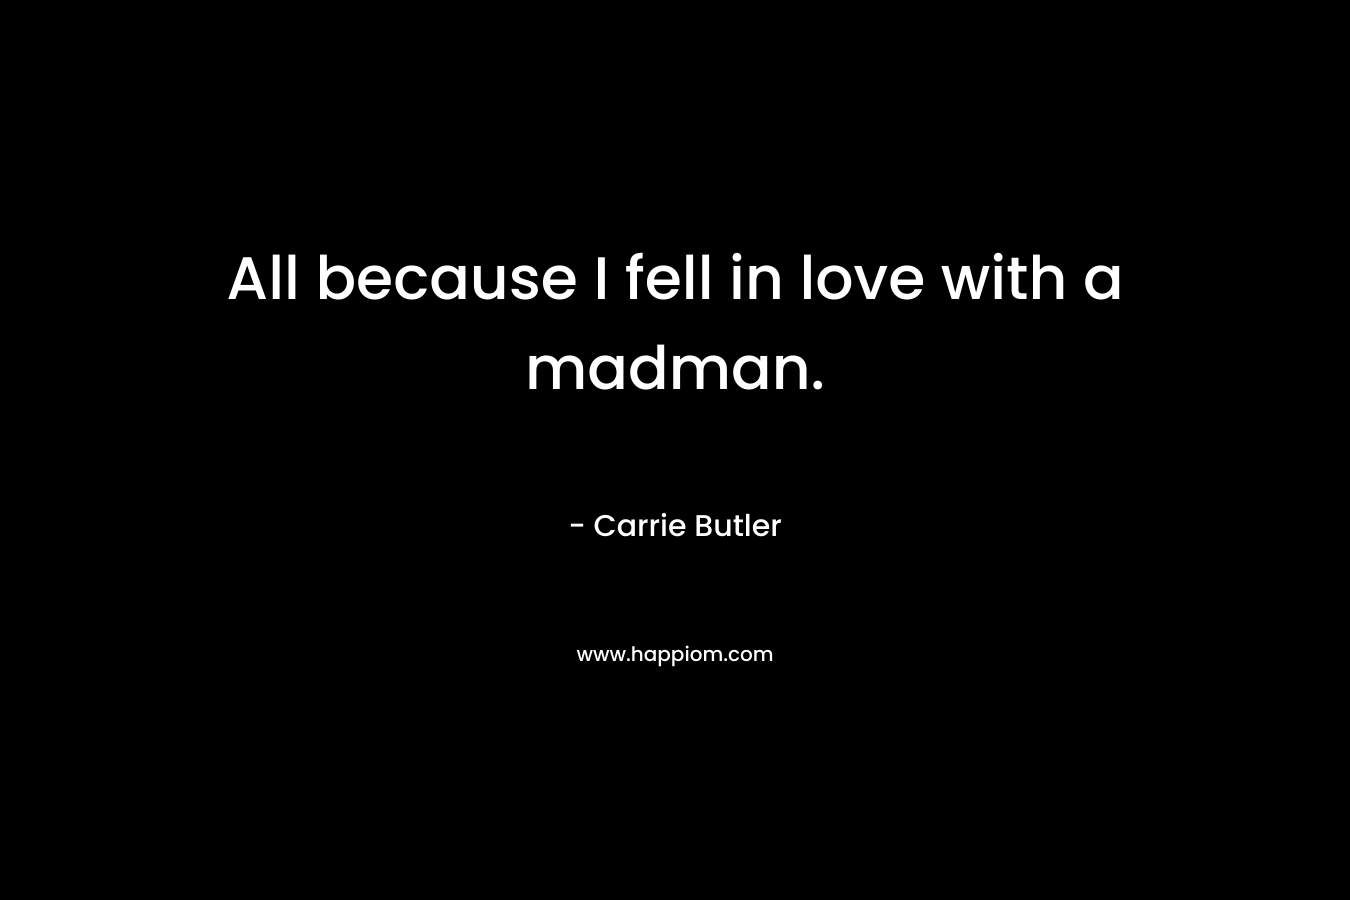 All because I fell in love with a madman. – Carrie Butler